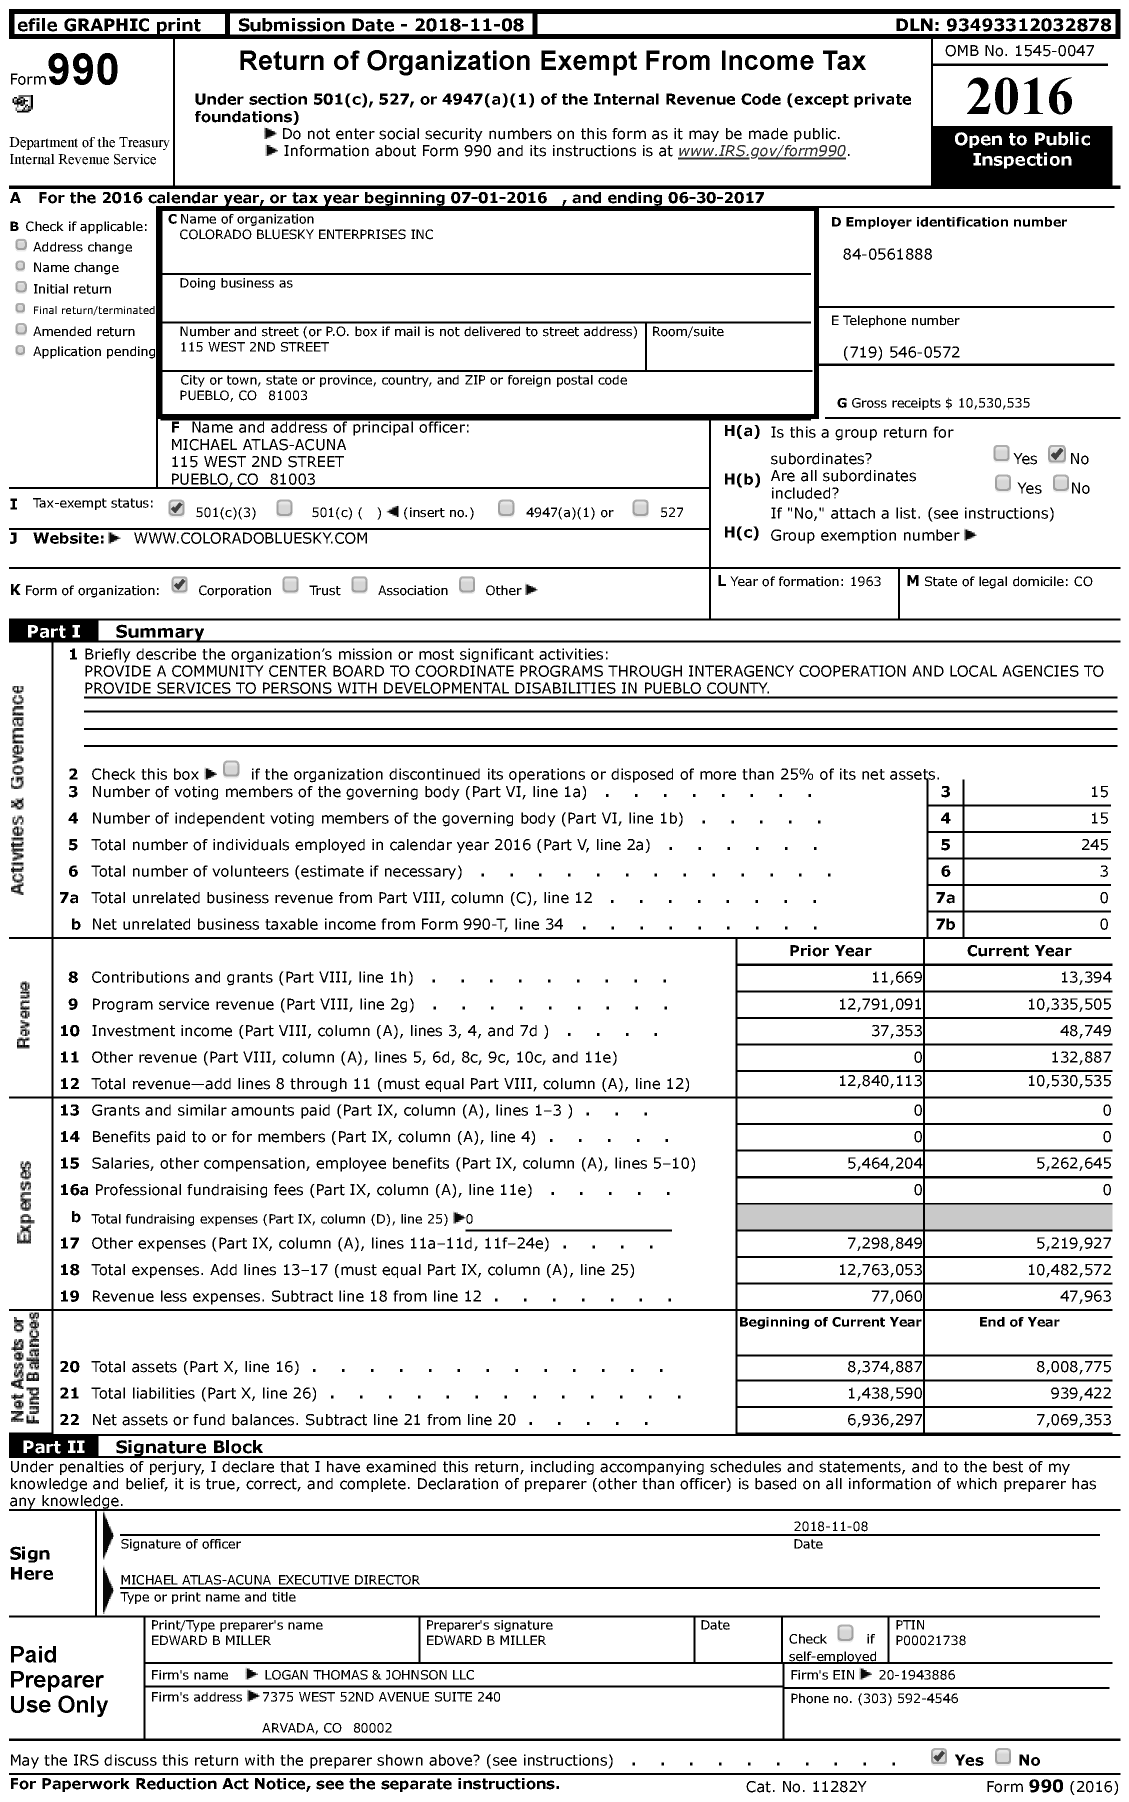 Image of first page of 2016 Form 990 for Colorado Bluesky Enterprises (CBE)